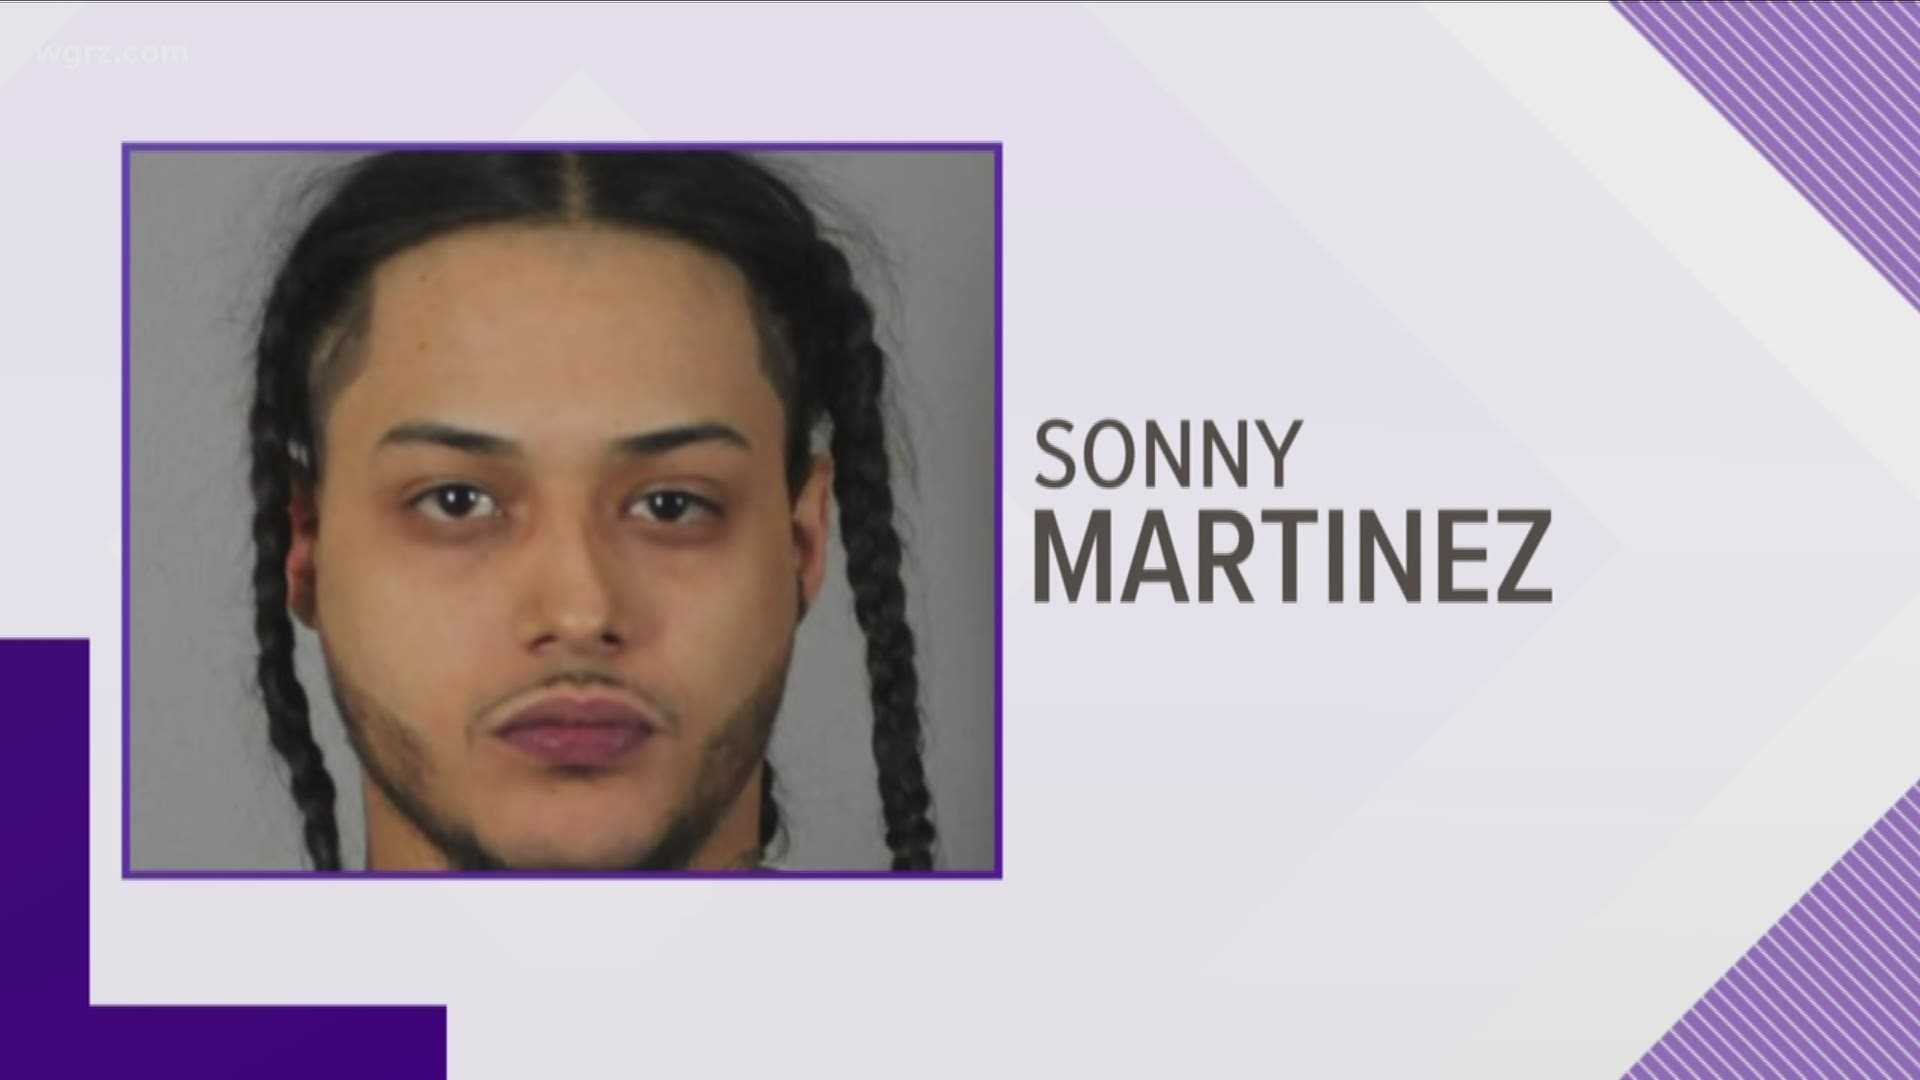 27-year-old Sonny Martinez was found guilty of strangling and killing Brittney Bal-bu-zoski